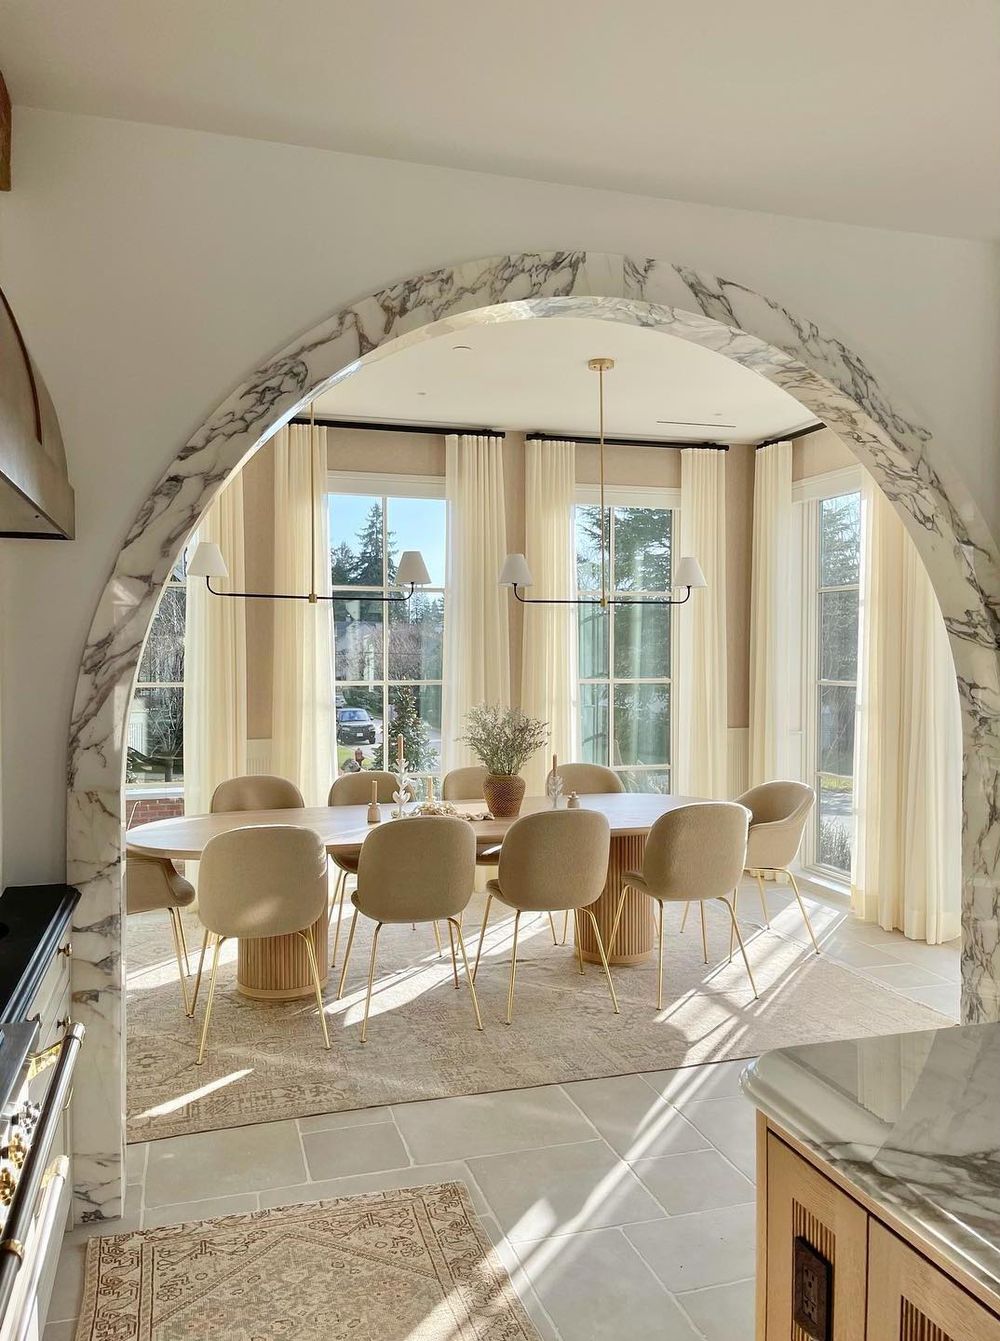 10 Favorites: The Allure of the Modern Interior Archway - Remodelista